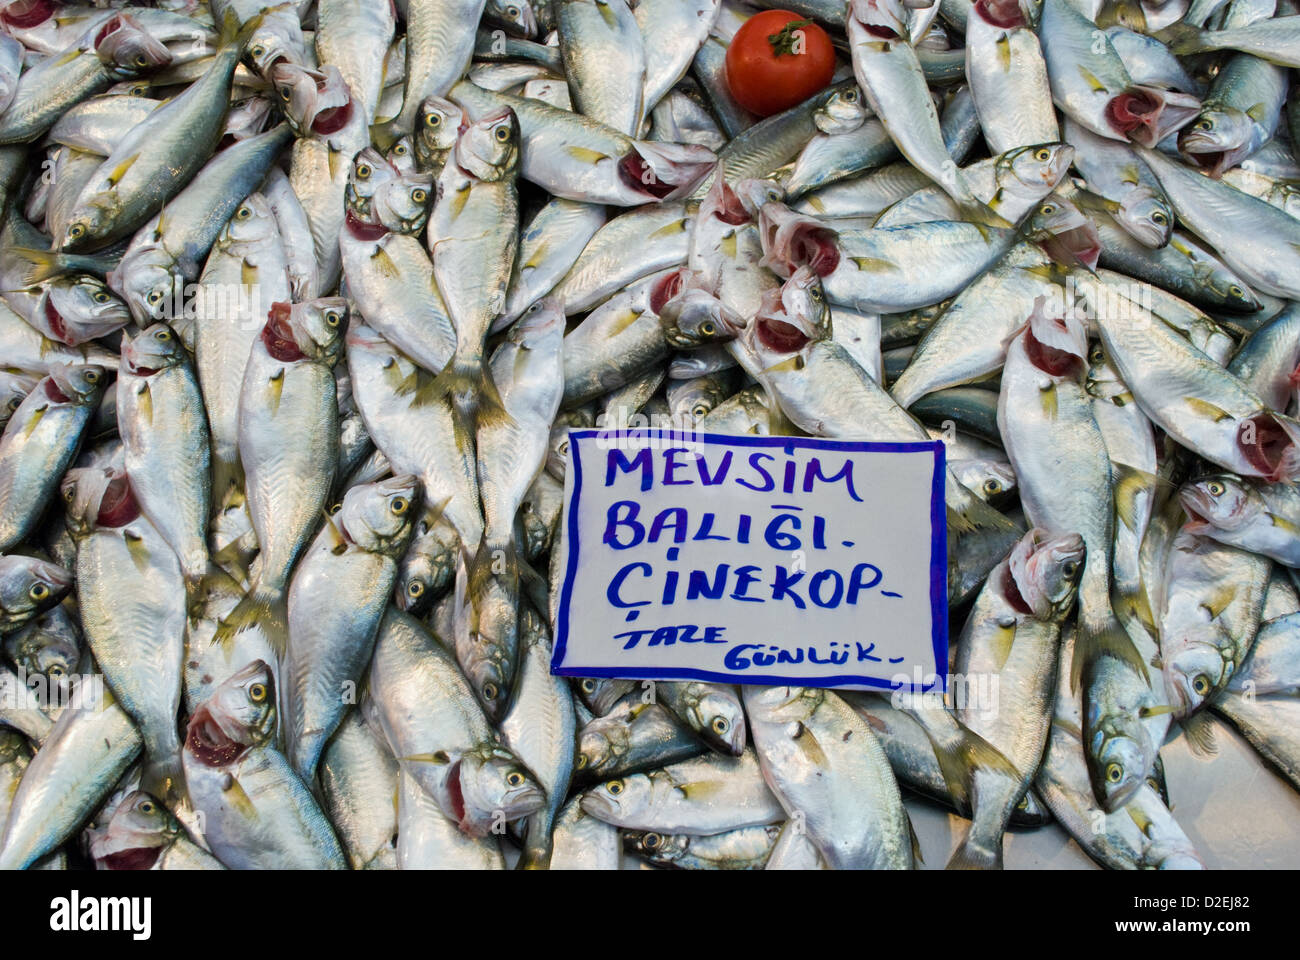 Fresh Bluefish from The Bhosphorous on sale in market in Tarlabasi, Istanbul. Stock Photo